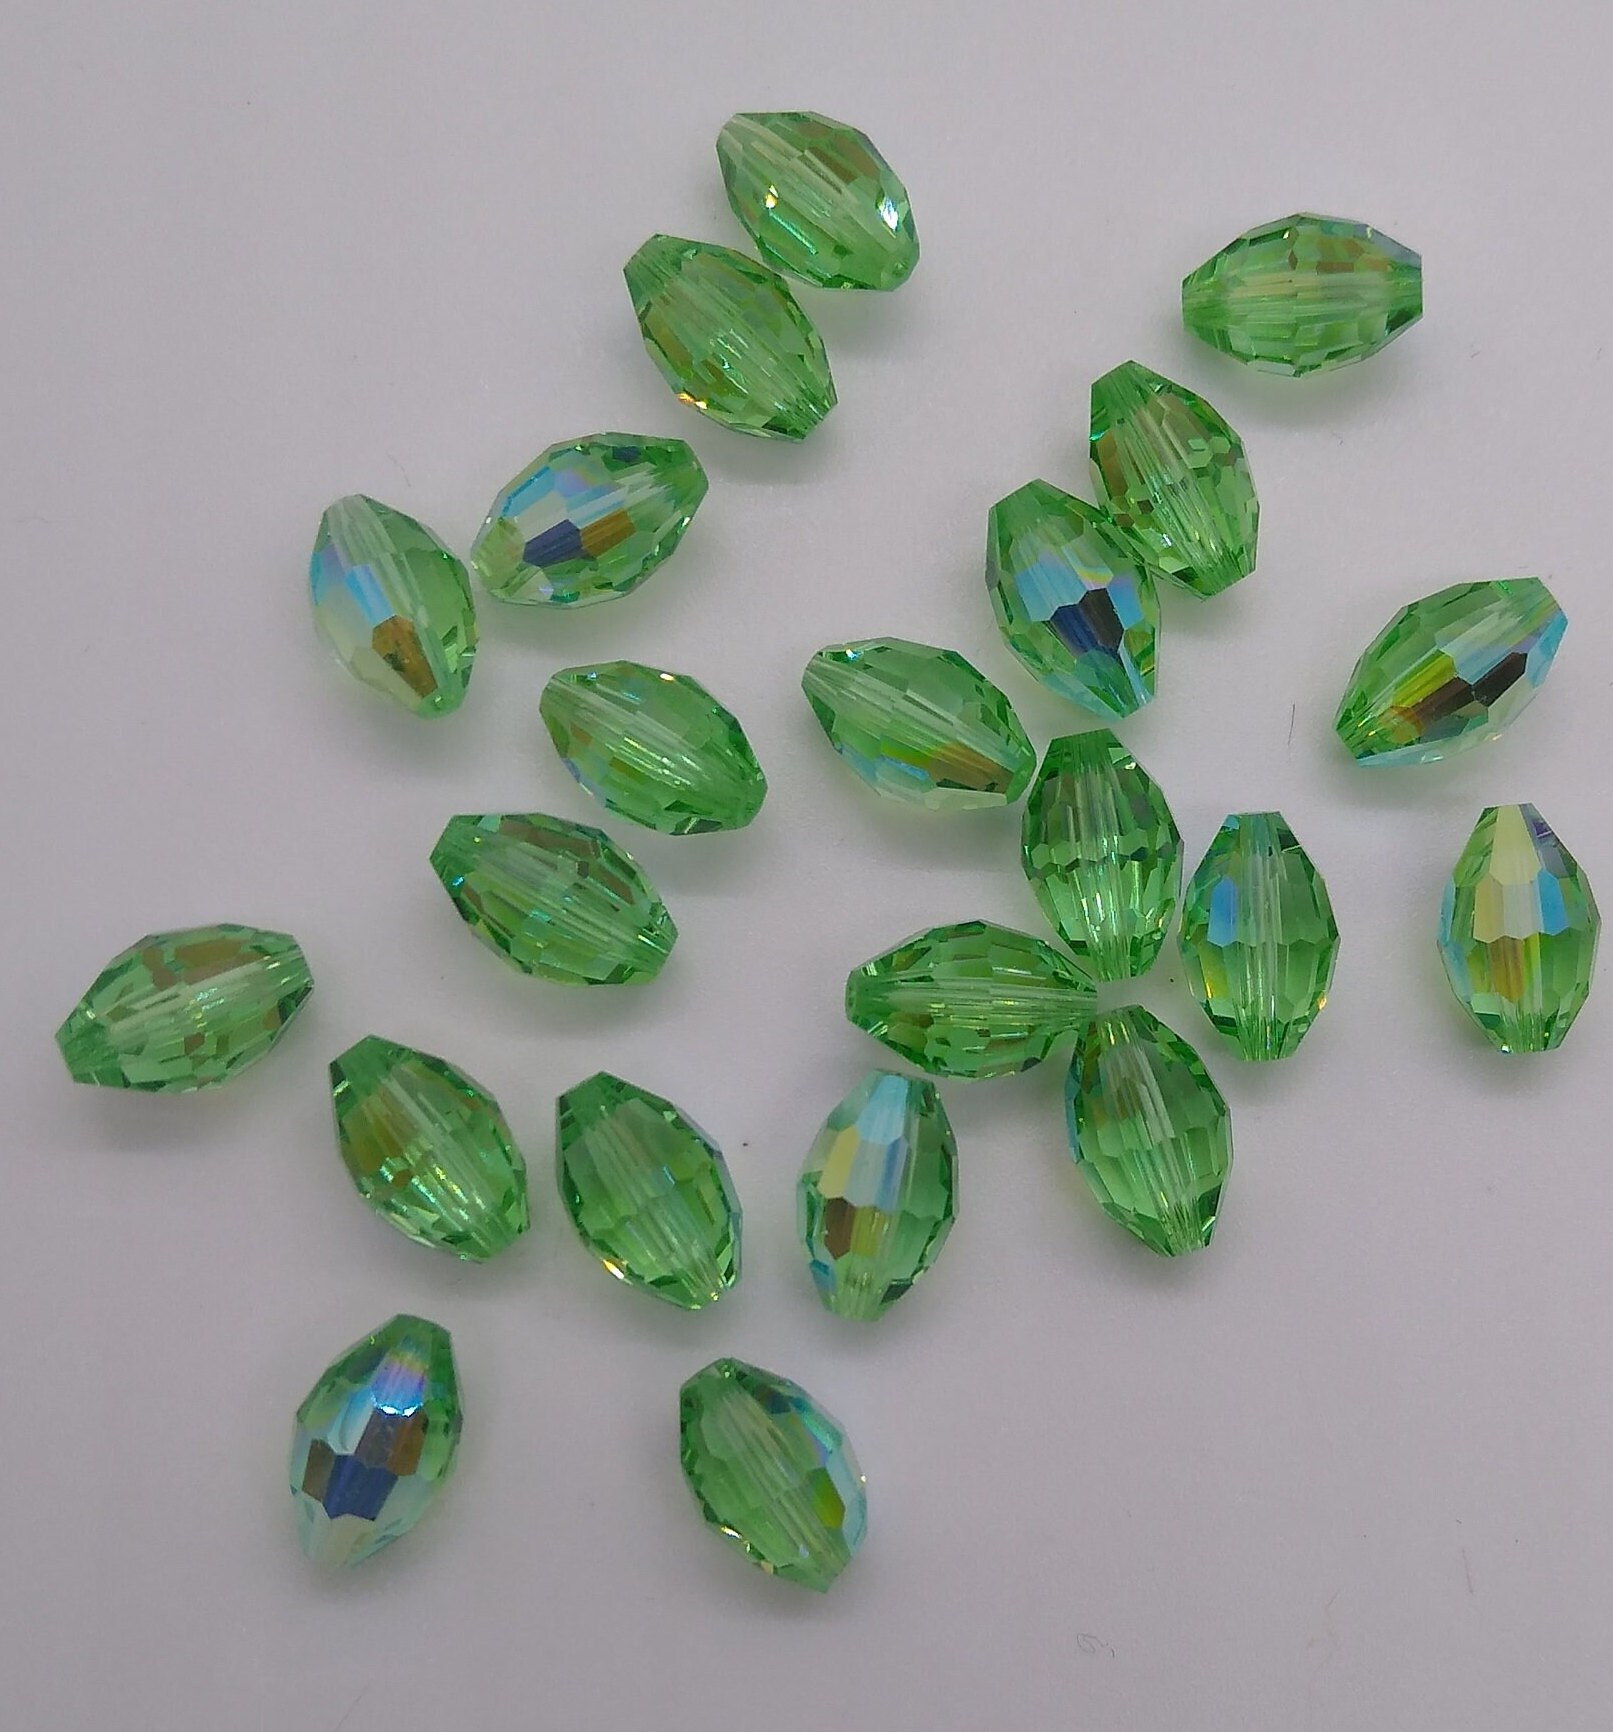 6pc Swarovski Crystal Clear AB 15x10mm Faceted Oval 5200 Bead; Vintage!